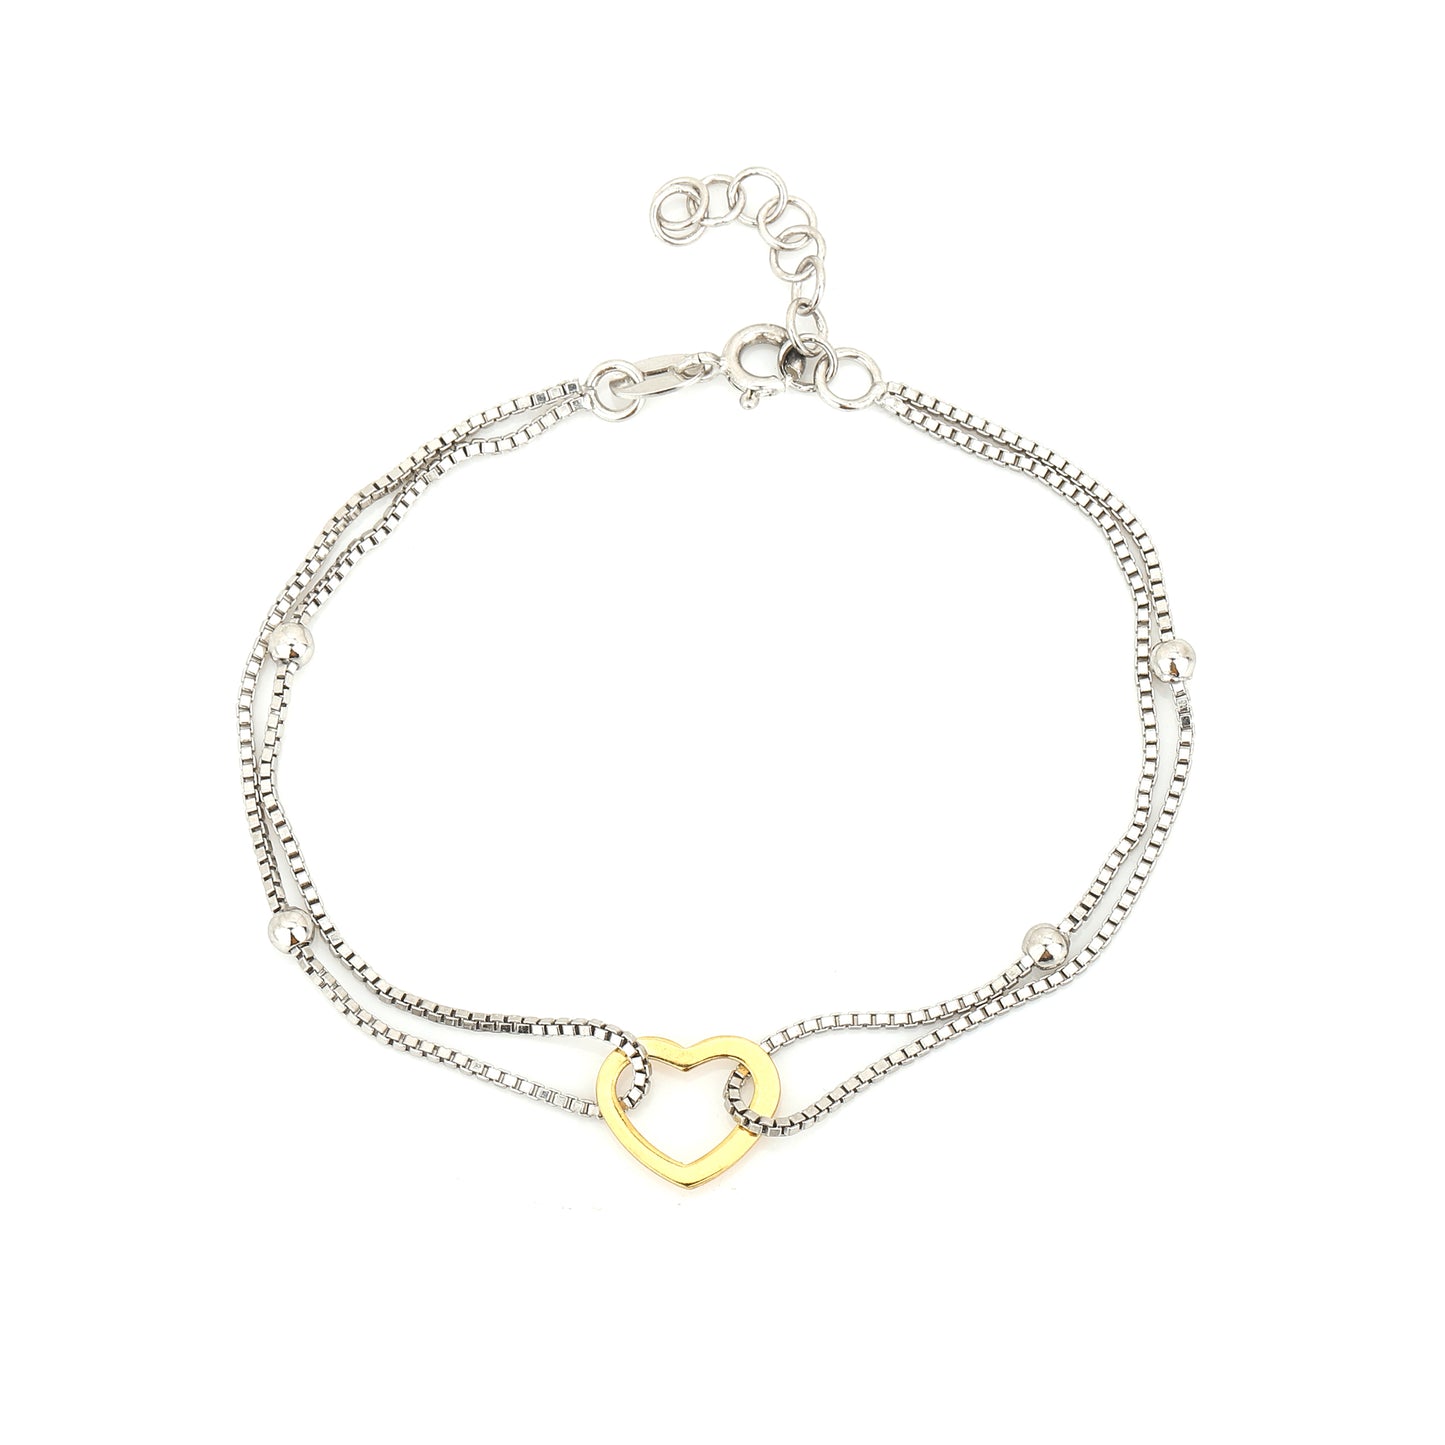 Carlton London Two Tone Bracelet with Gold Heart and Double Silver Chains